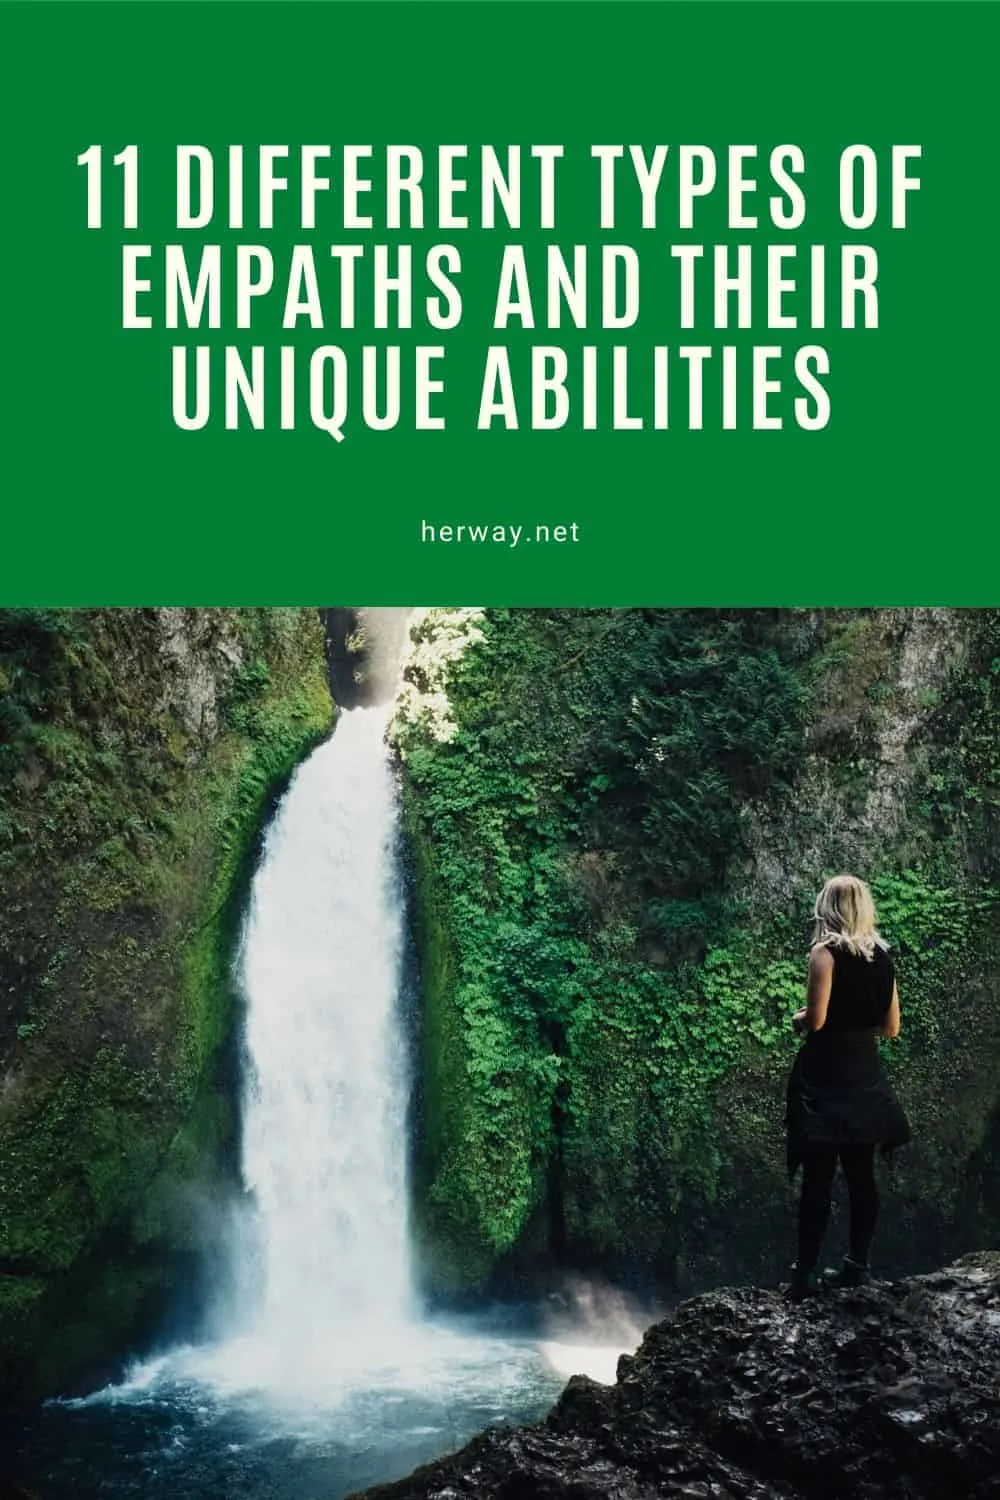 11 Different Types Of Empaths And Their Unique Abilities